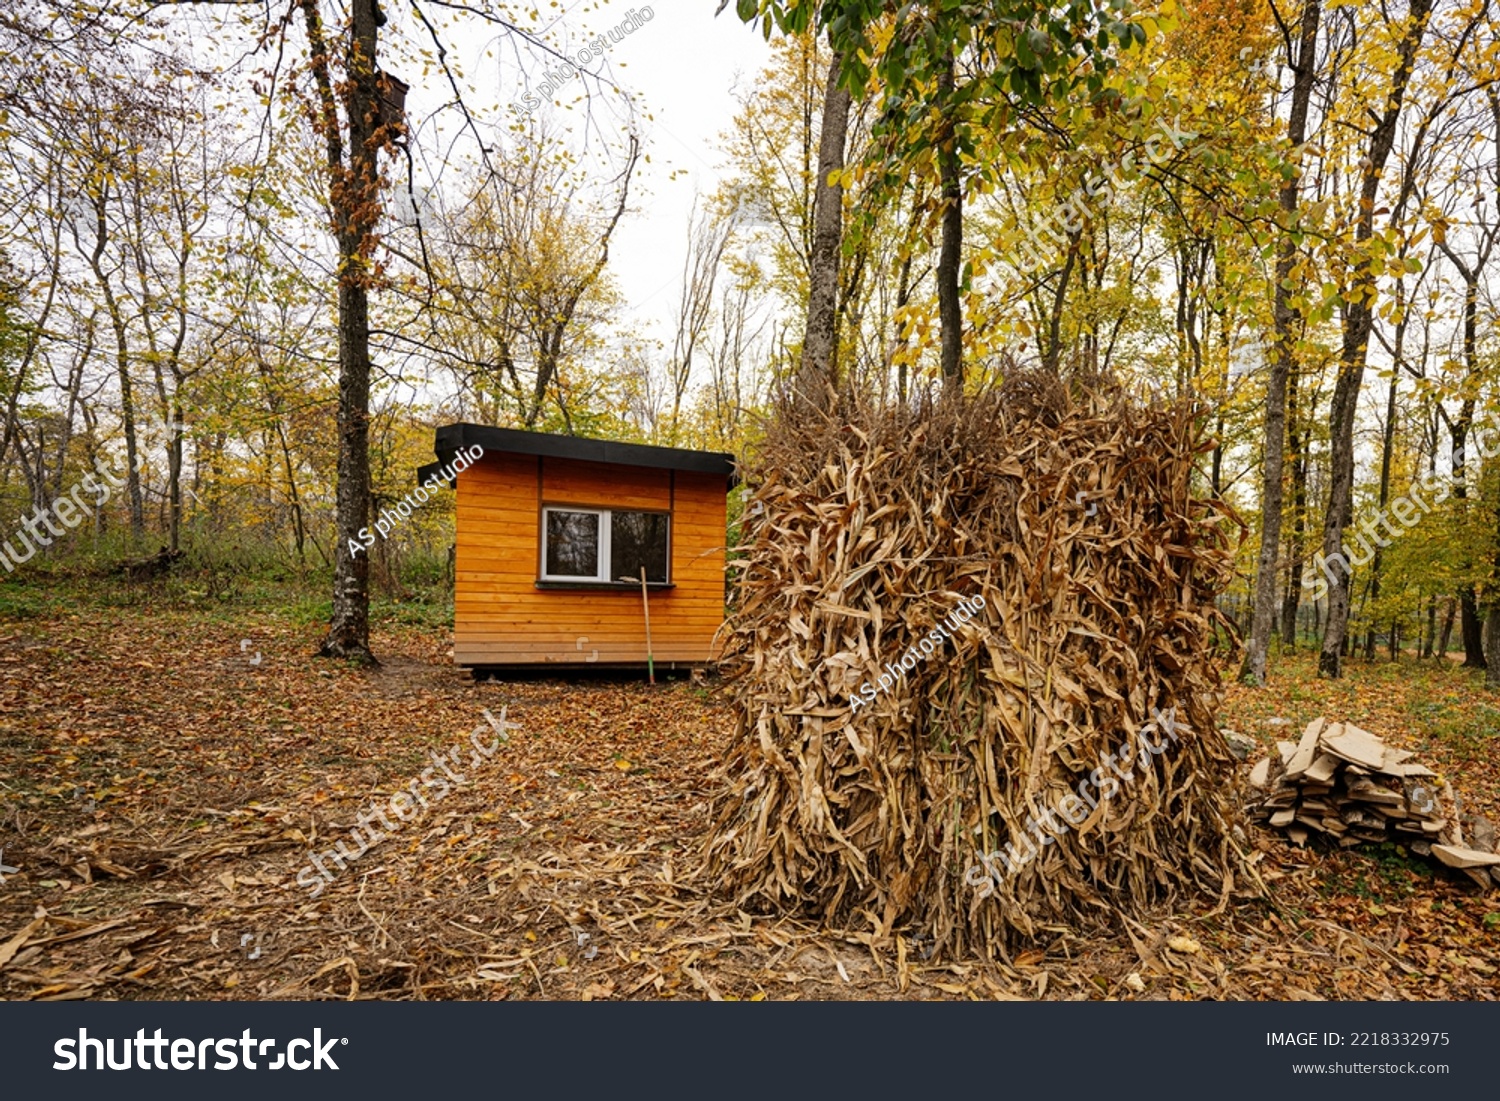 Forester's house in autumn forest with ear of corn. #2218332975